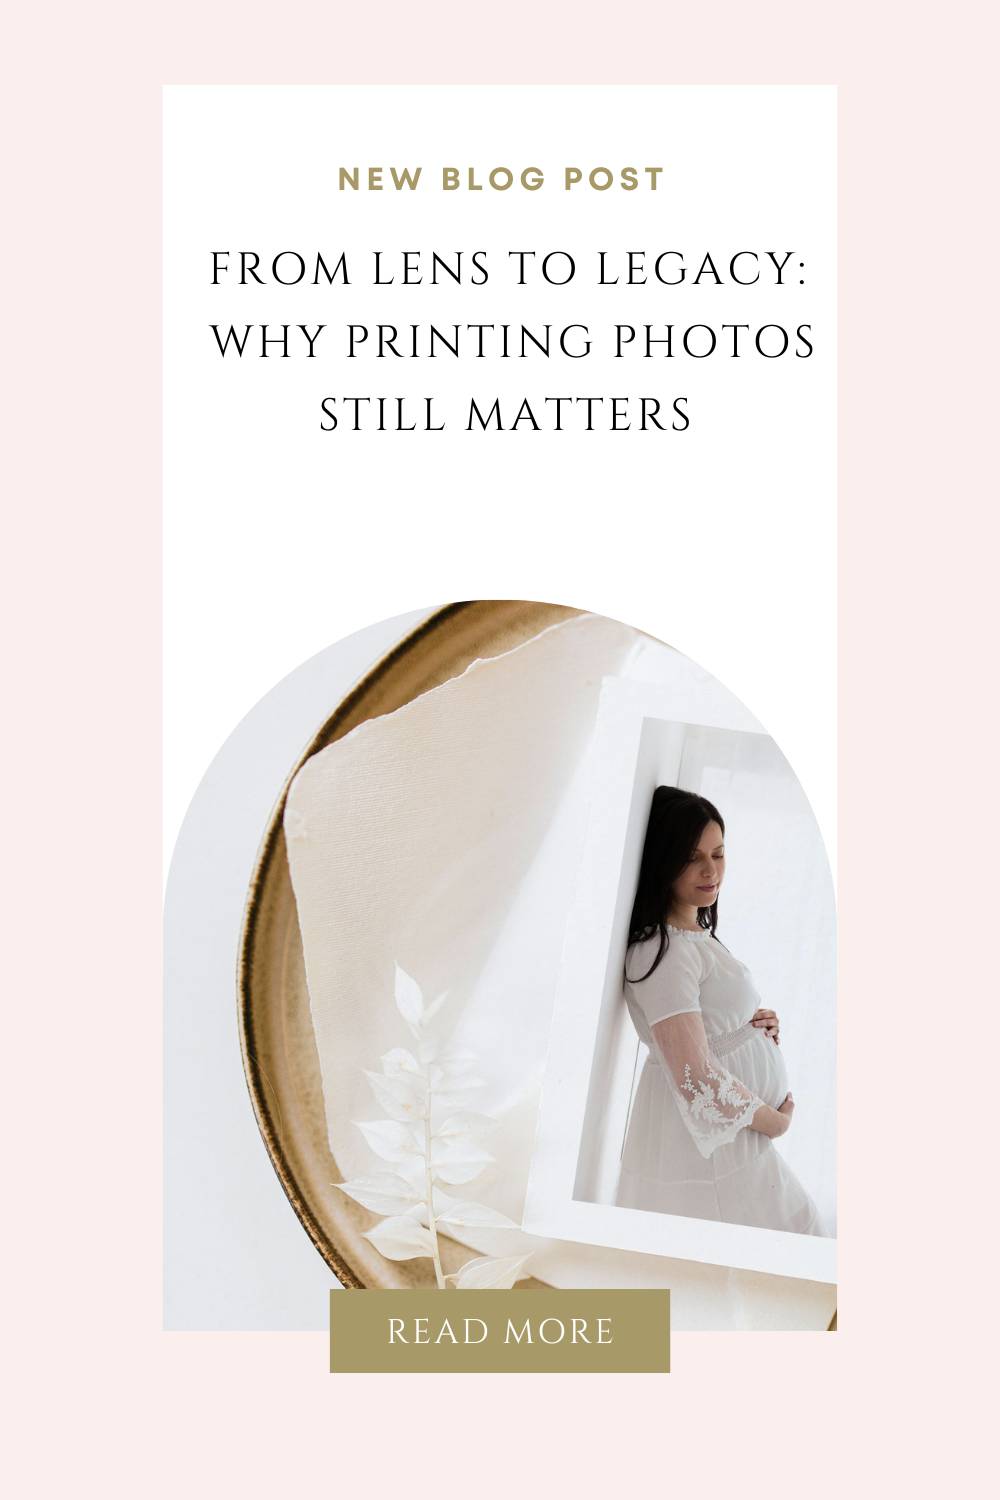 graphic for the blog - Why printing photos matters